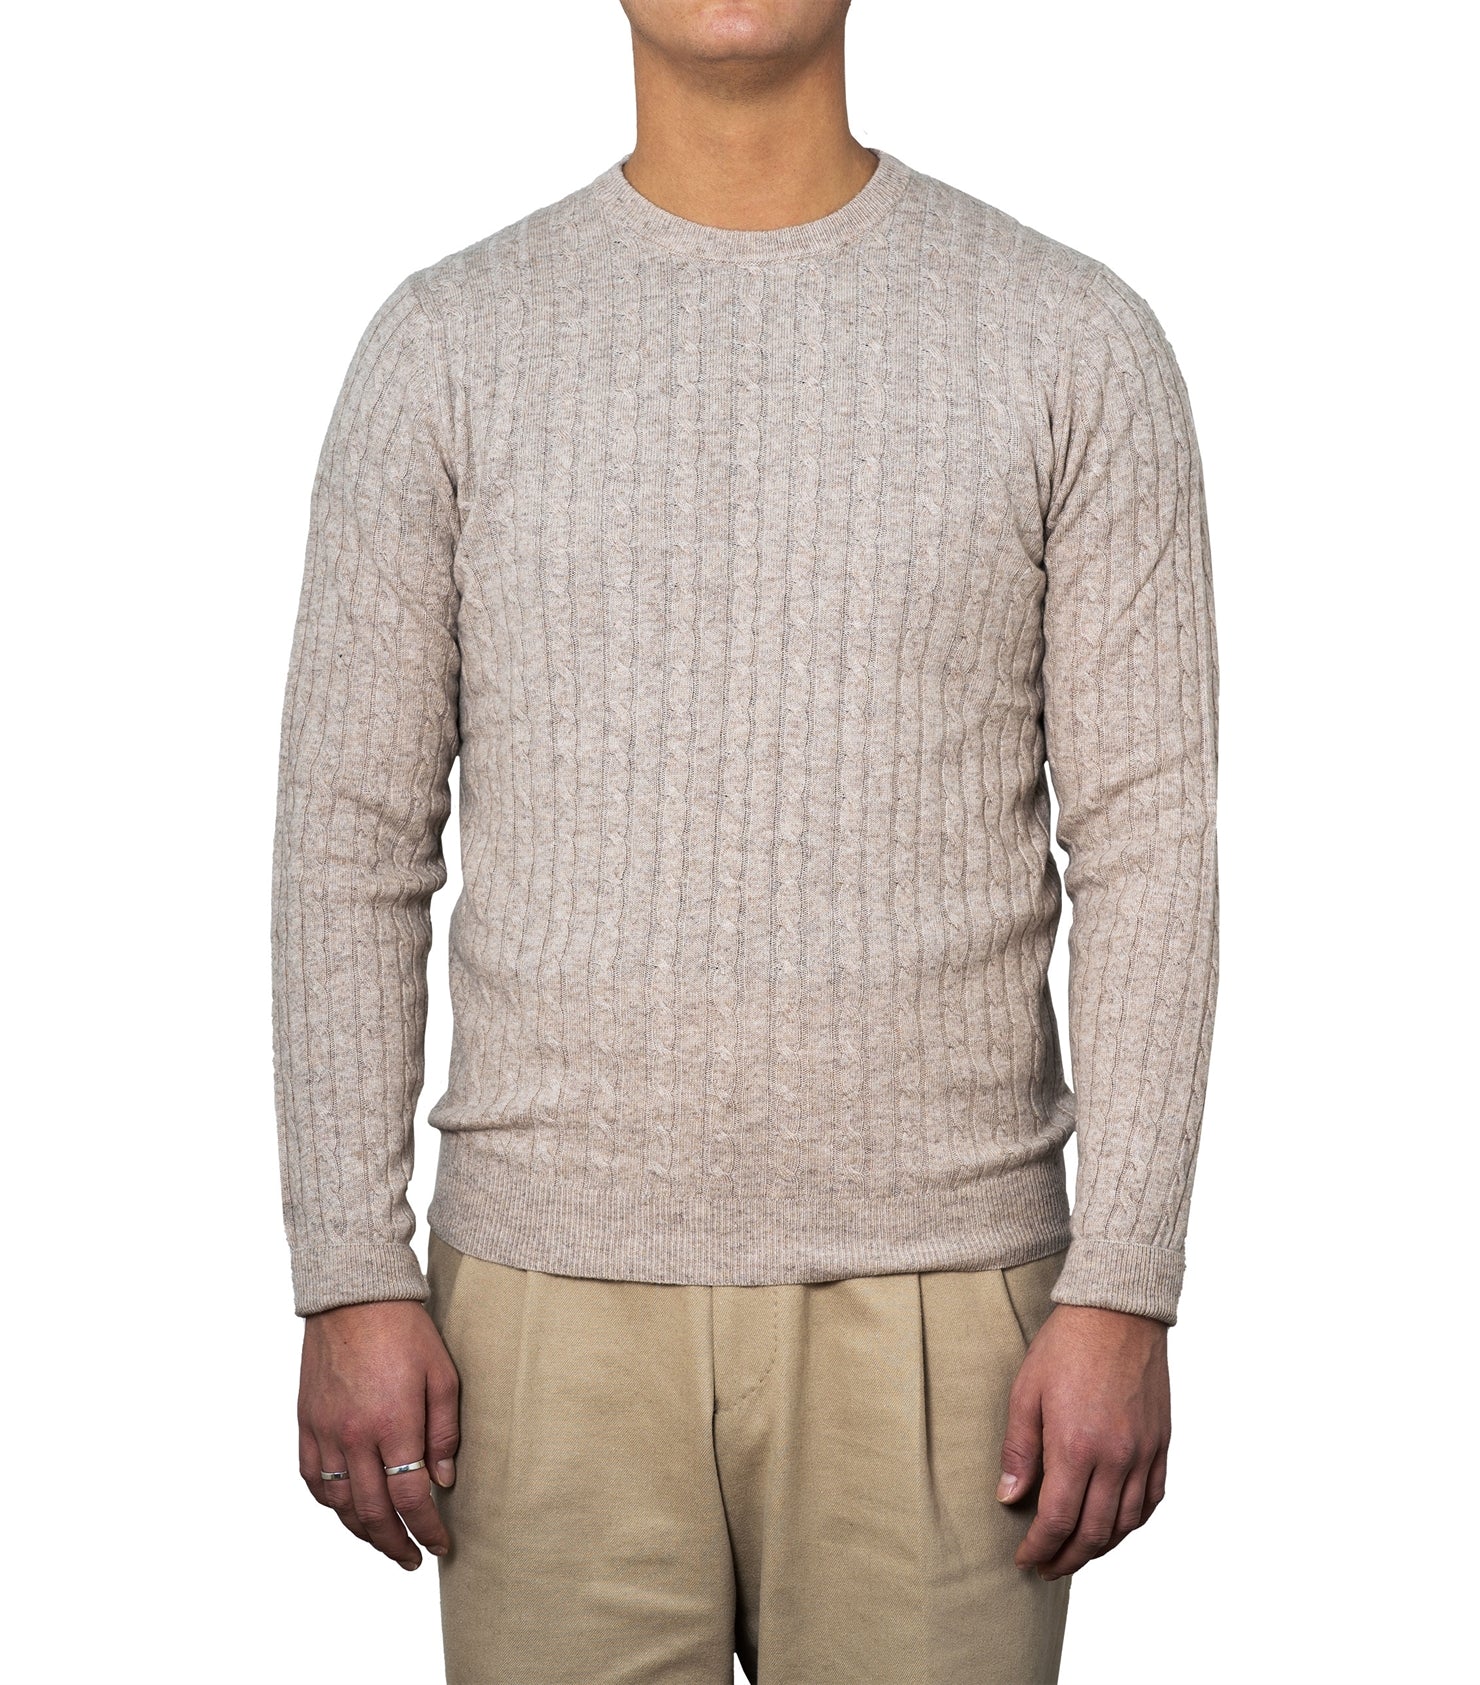 Enar Beige Cable Knit Sweater